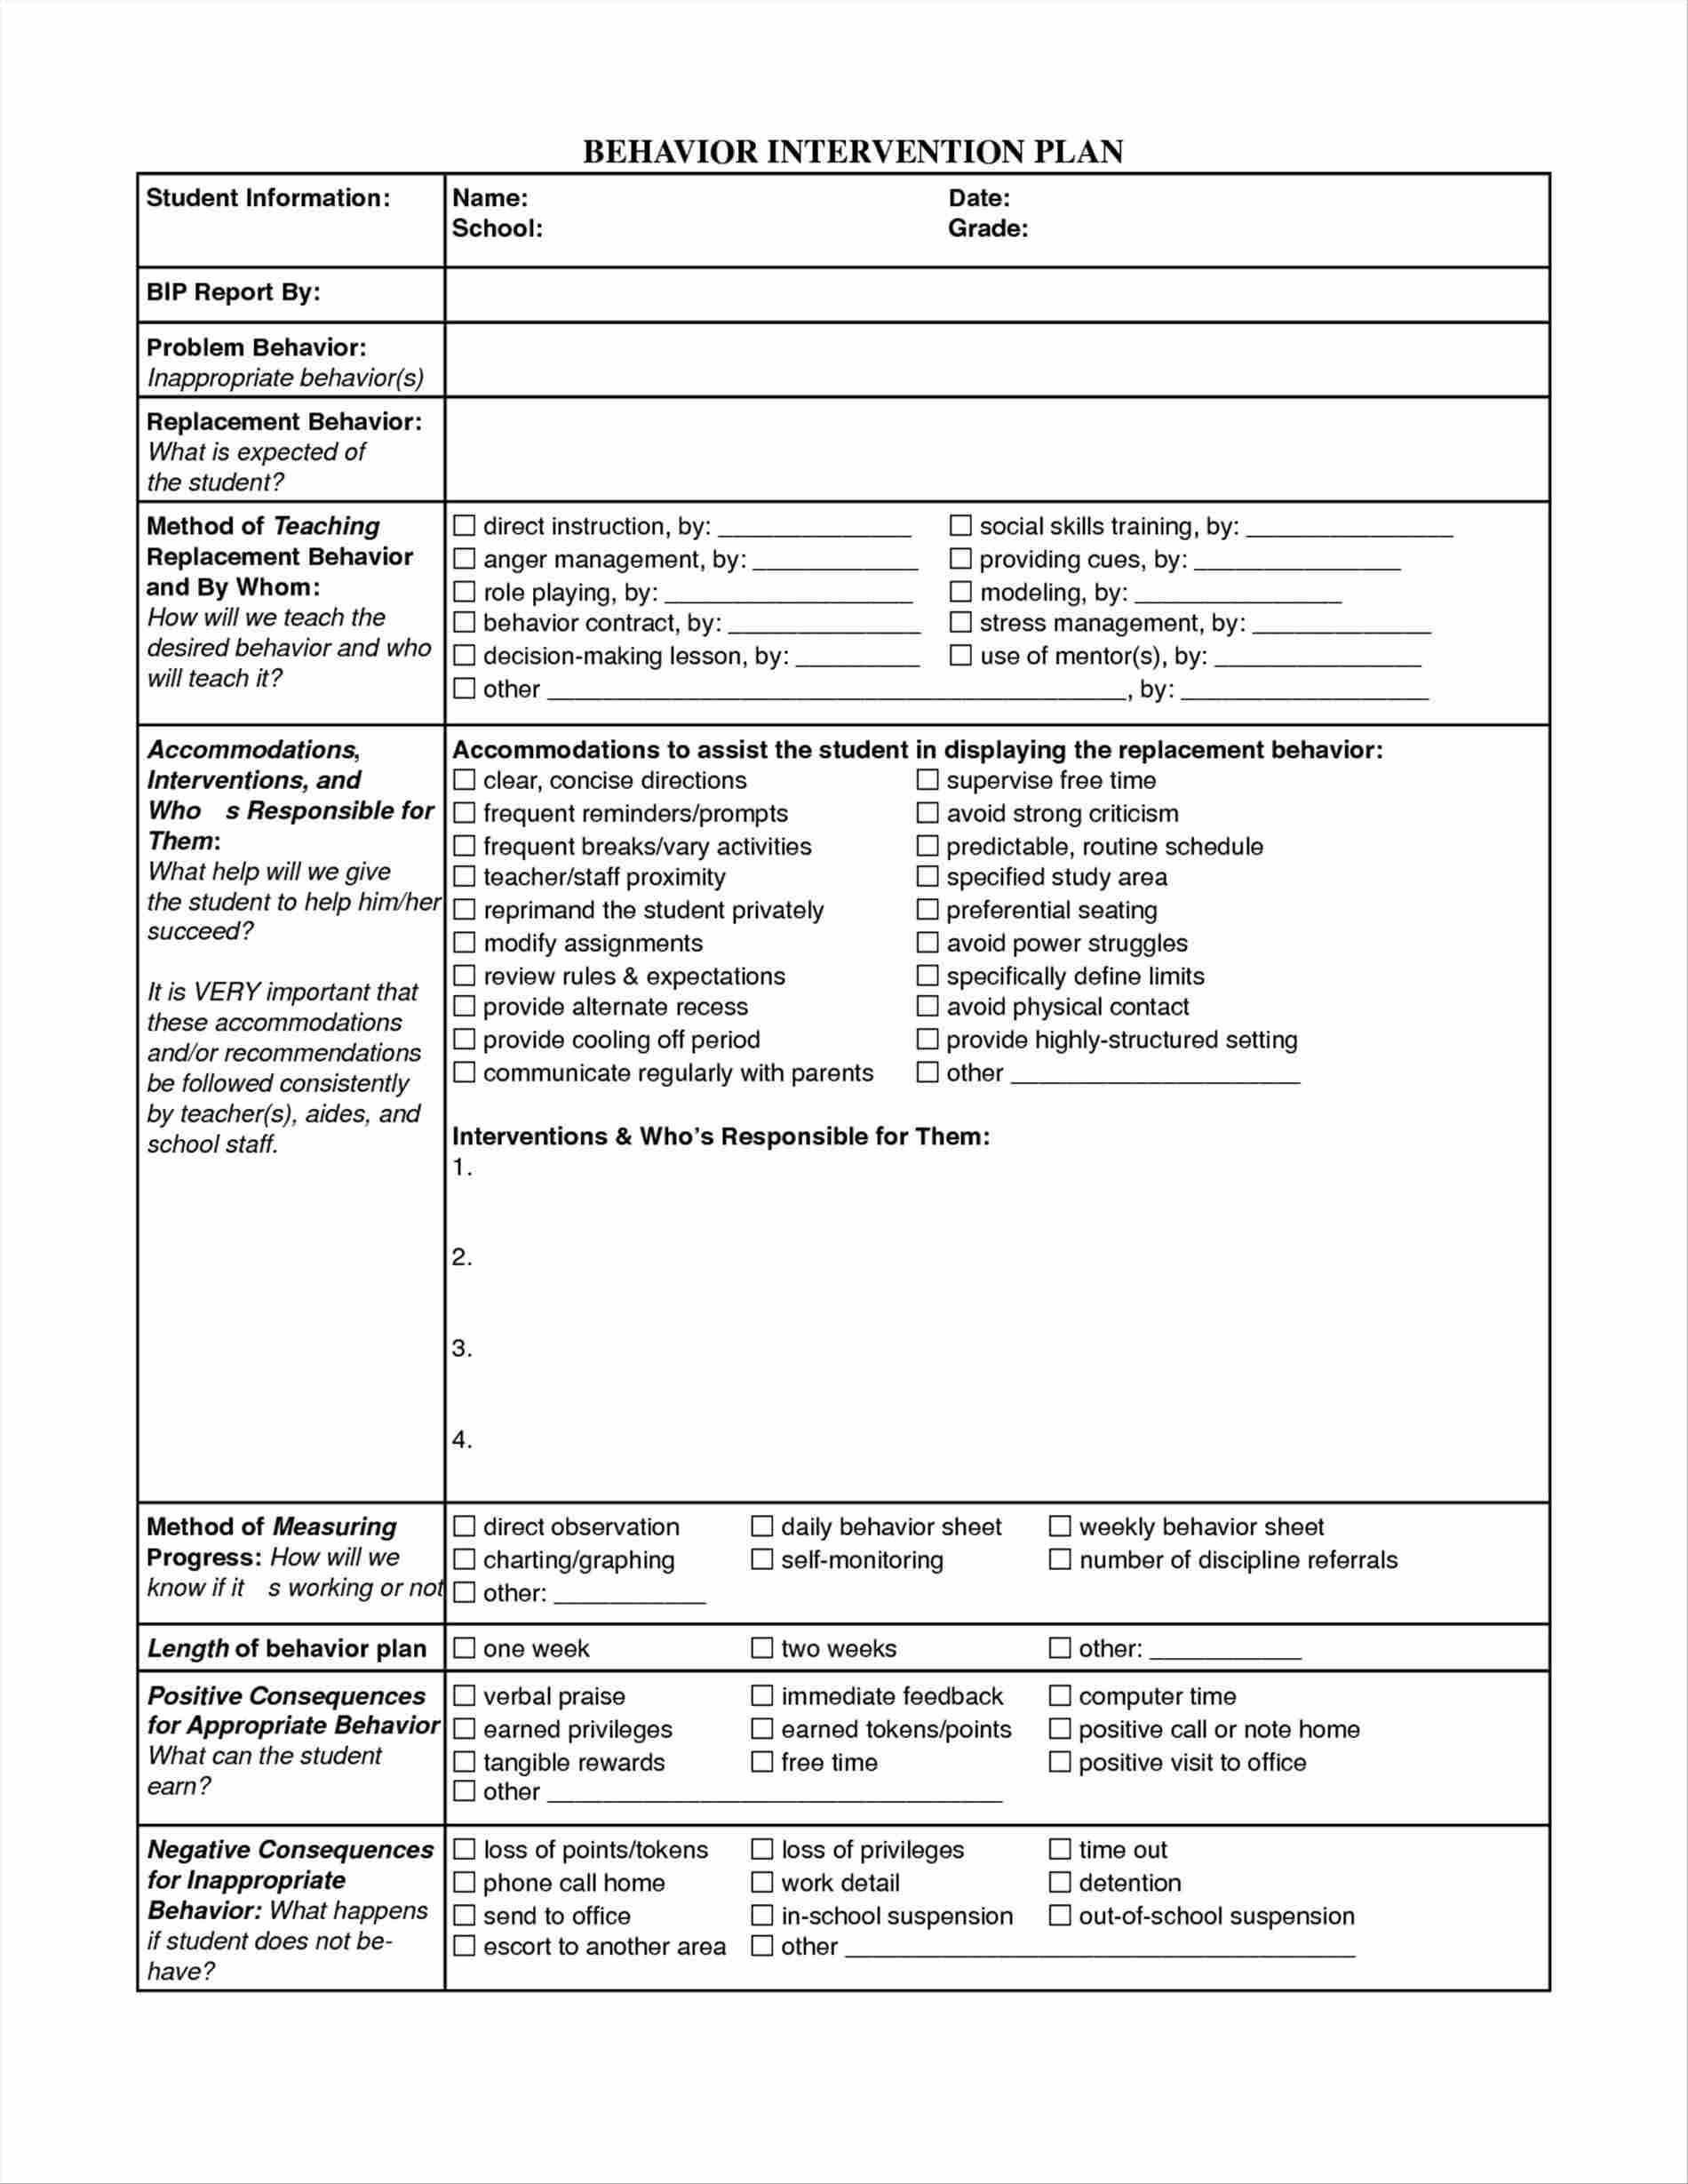 Bad Attitude Worksheets | Printable Worksheets And With Intervention Report Template